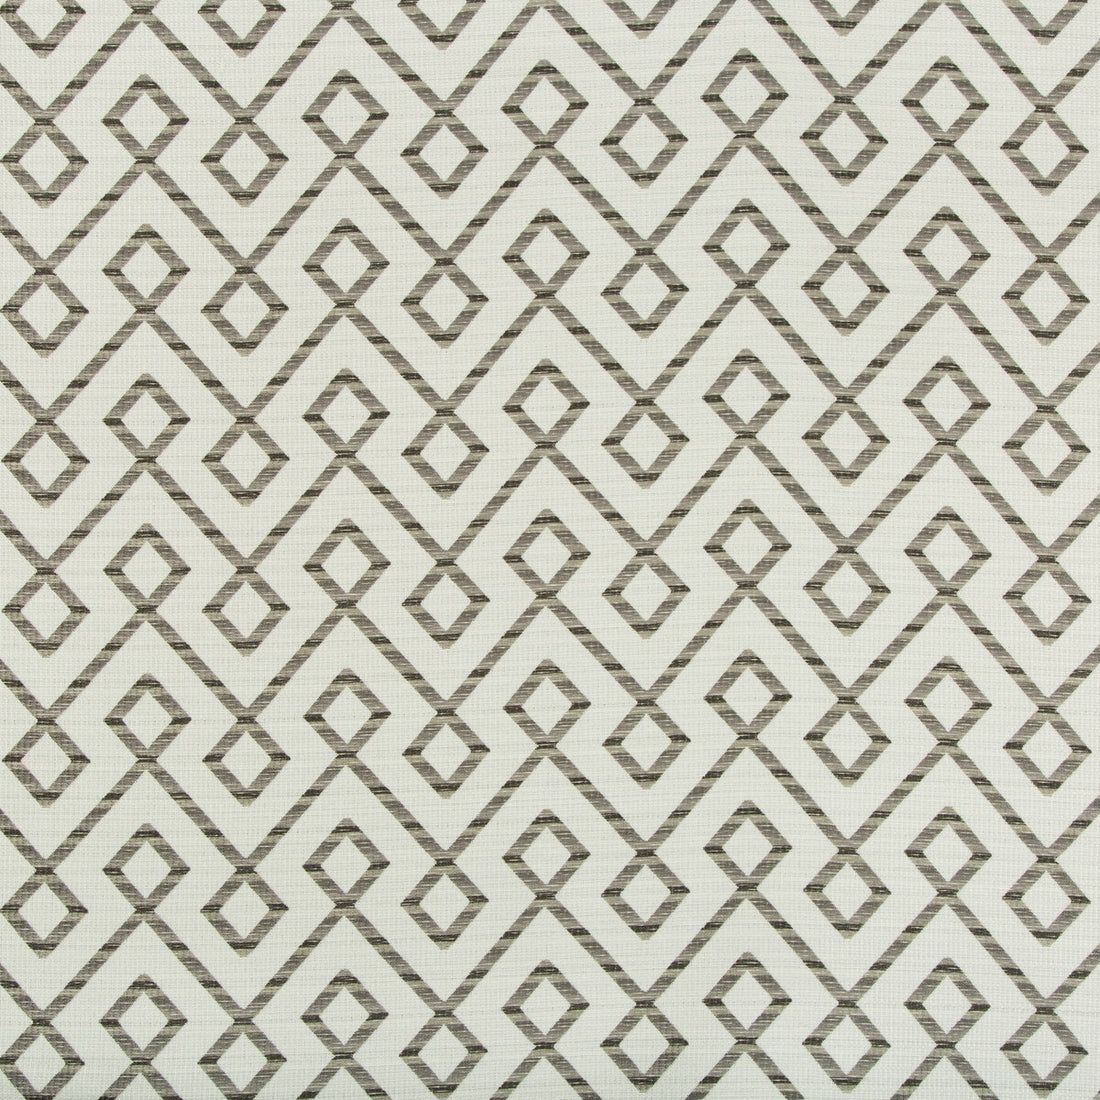 Kravet Design fabric in 34708-1611 color - pattern 34708.1611.0 - by Kravet Design in the Performance Crypton Home collection